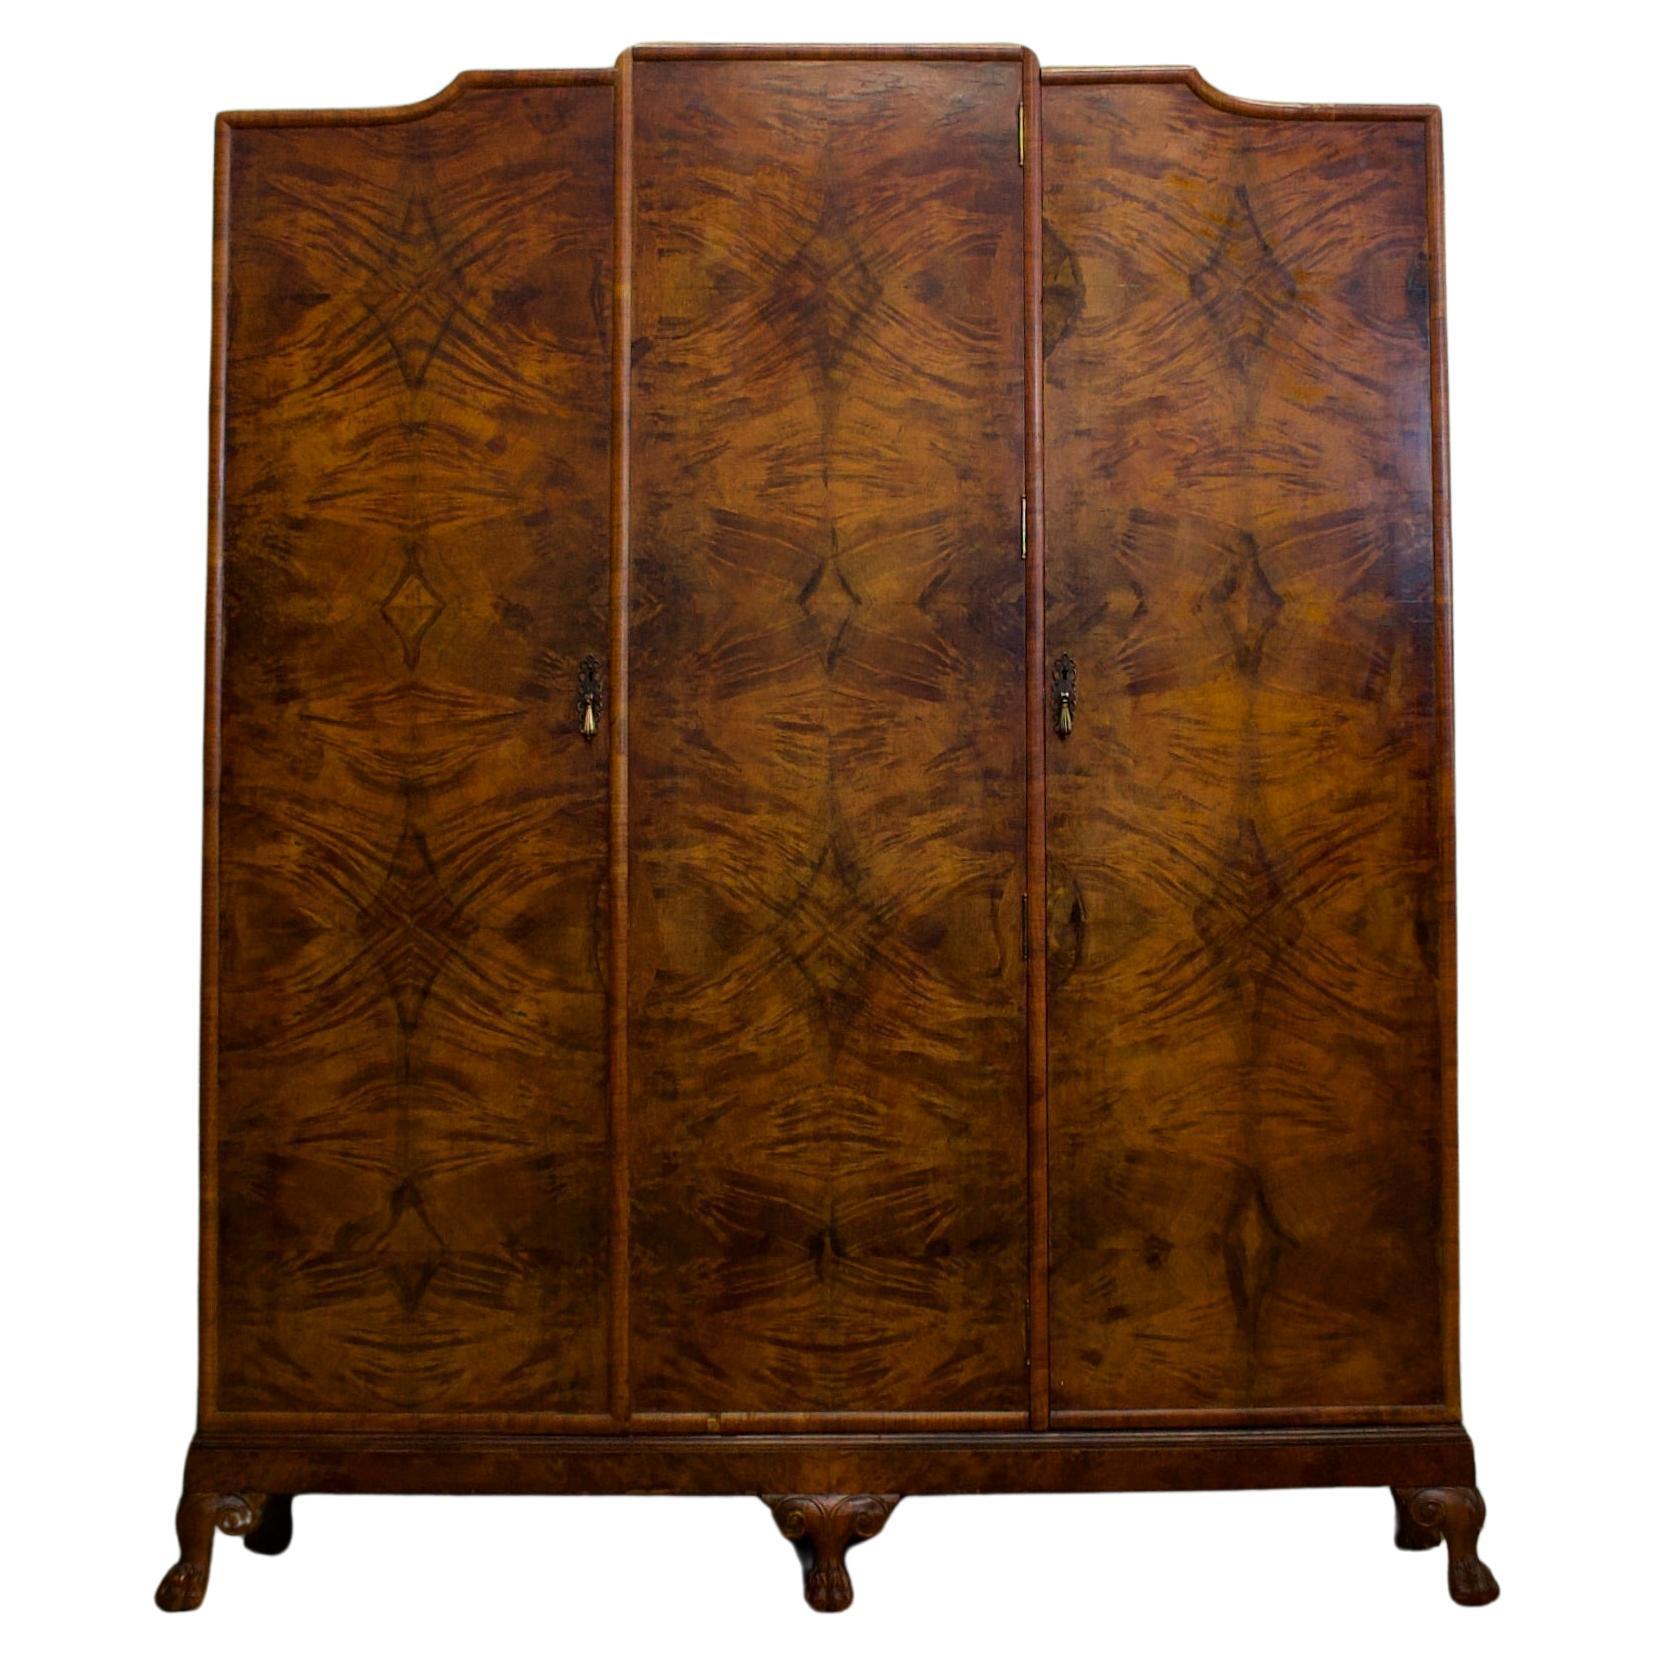 An impressive quality, 1930's burr walnut triple door wardrobe - perfect for a maximalist interior

This piece is Art Deco in style, with influences of Art Nouveau

The interior is beautifully fitted with a hanging rail and shelf to the larger